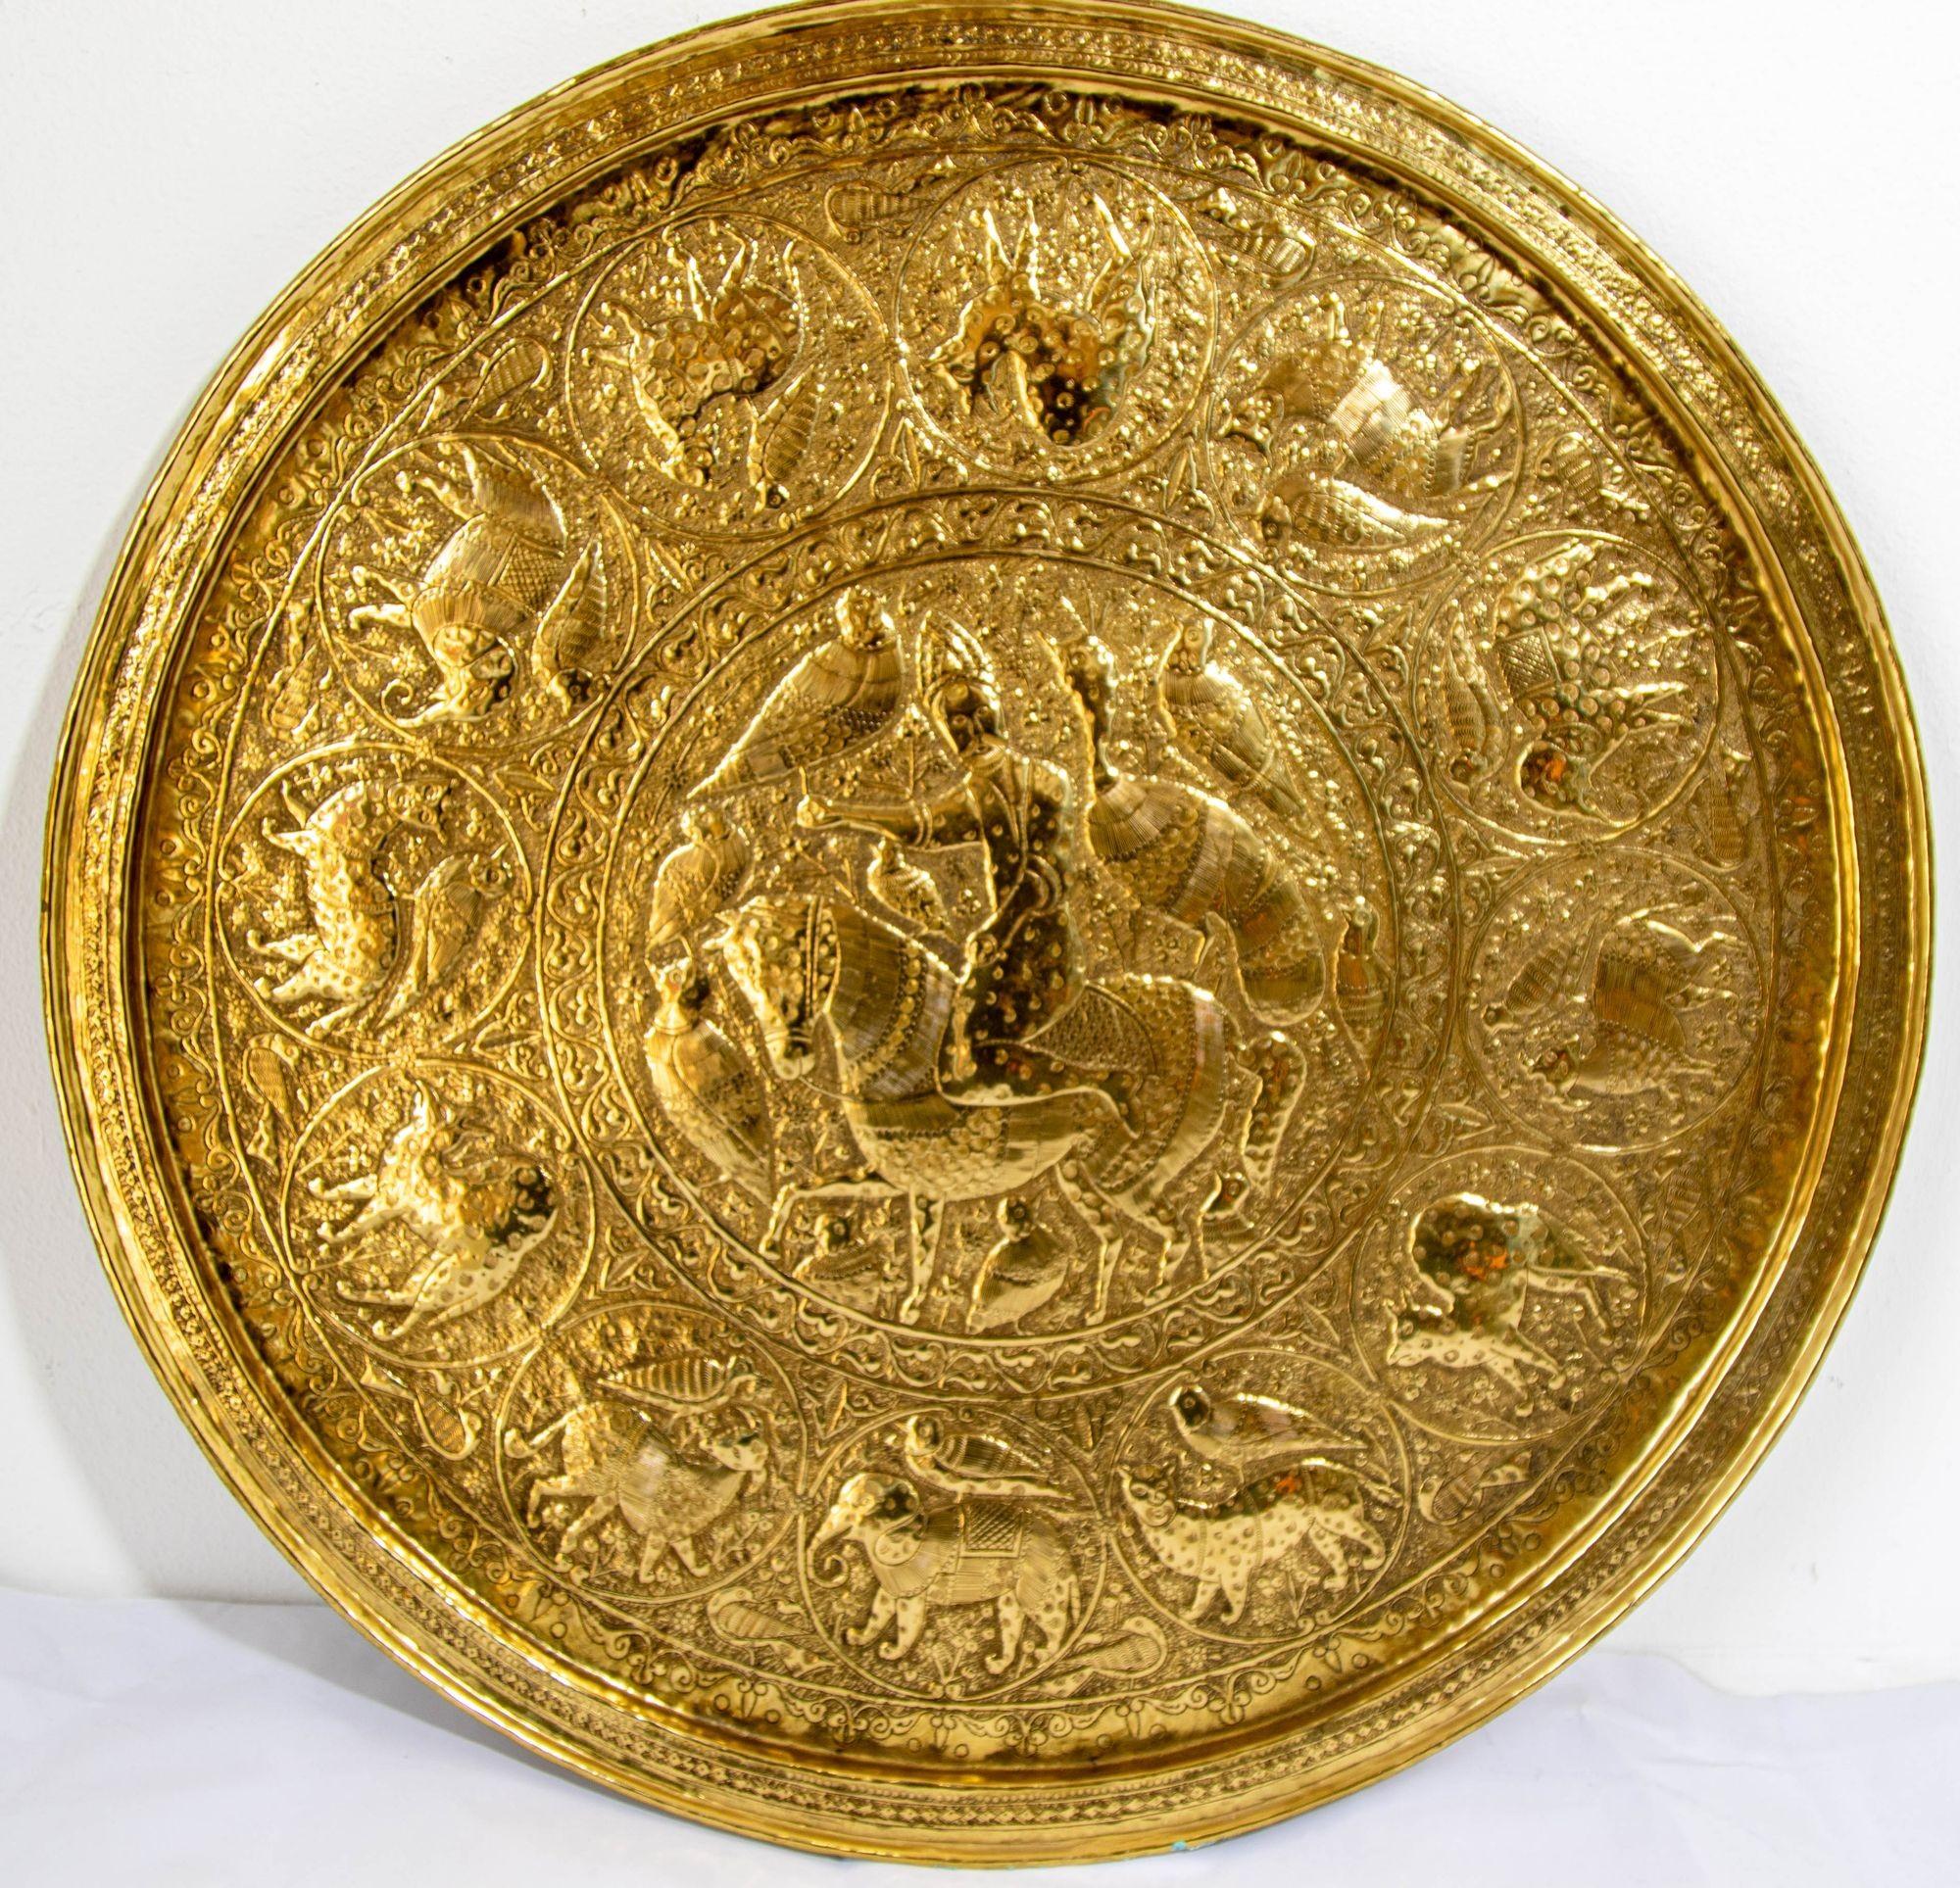 A large and impressive Qajar style circular brass tray, early 20th century.
Measures: 24 1/2 in. diameter.
Heavy metal brass finely hand chased, engraved, and punched.
The handcrafted circular brass platter is decorated and hammered, the center